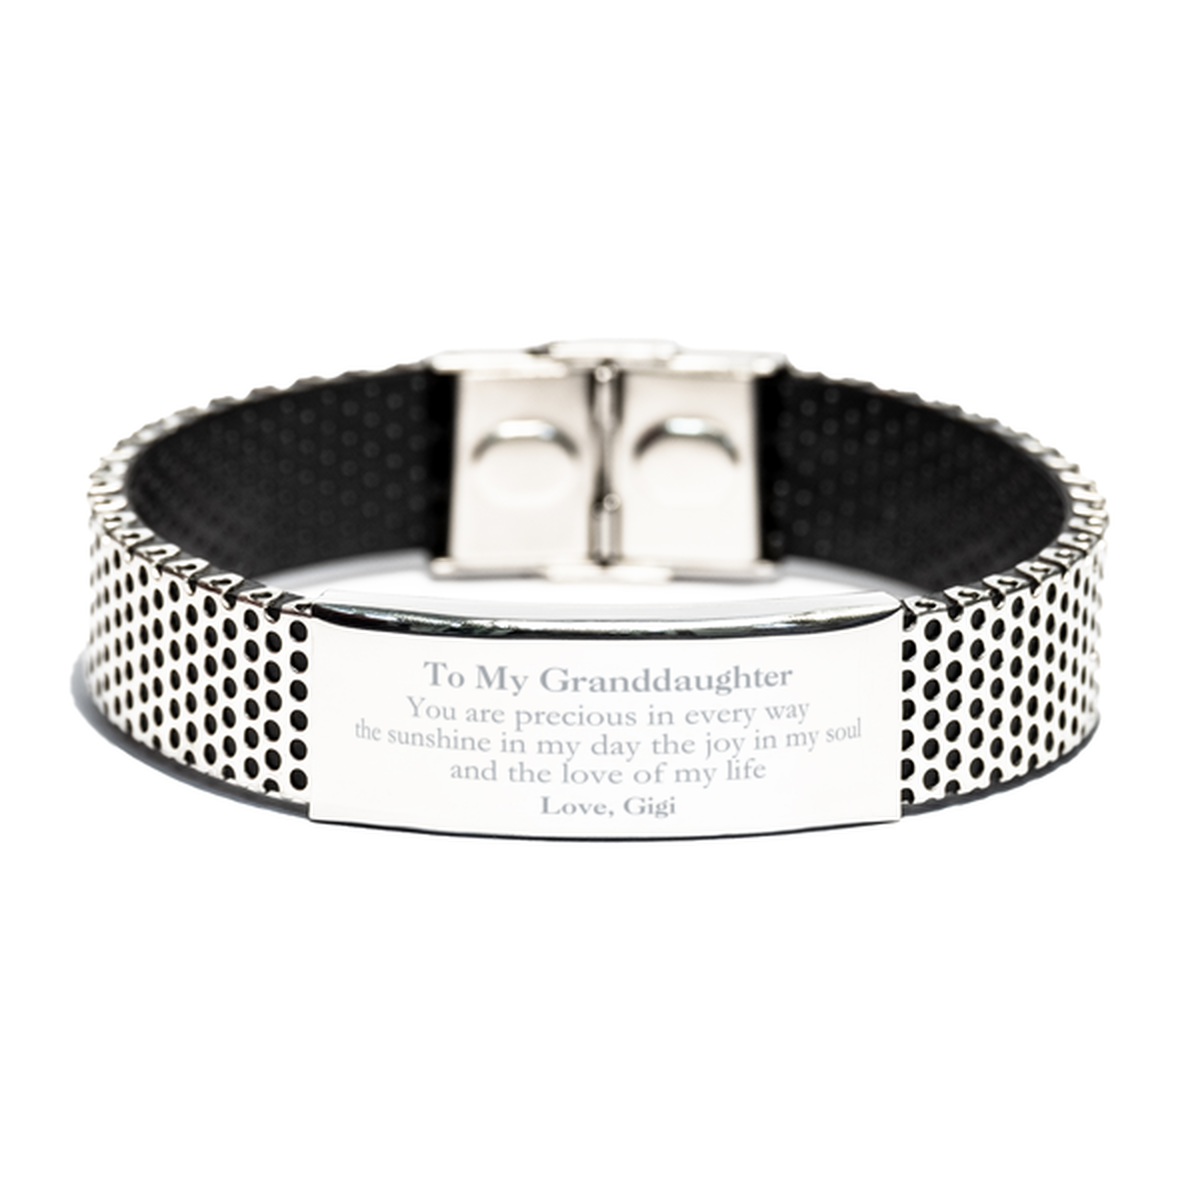 Graduation Gifts for Granddaughter Stainless Steel Bracelet Present from Gigi, Christmas Granddaughter Birthday Gifts Granddaughter You are precious in every way the sunshine in my day. Love, Gigi